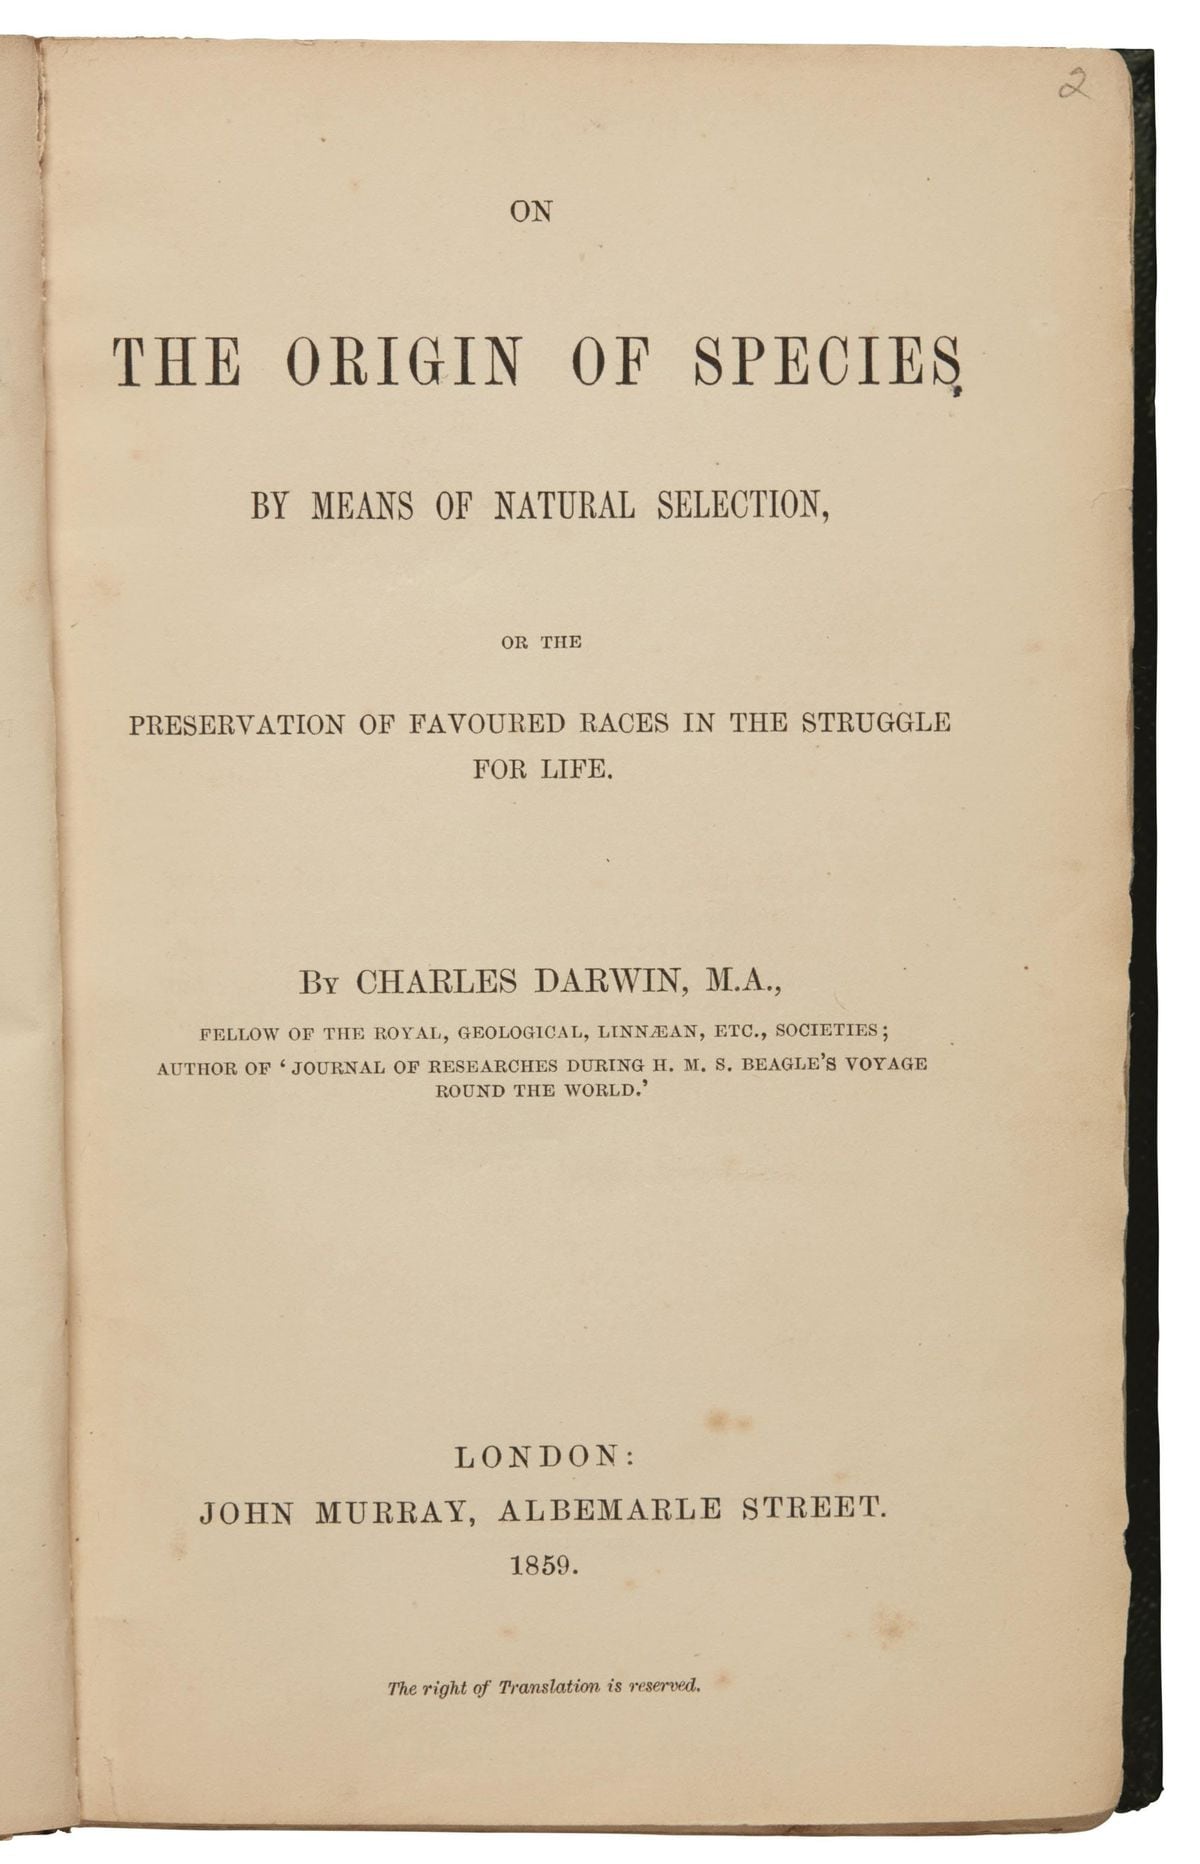 Rare Charles Darwin book to sell for £50,000 | Shropshire Star